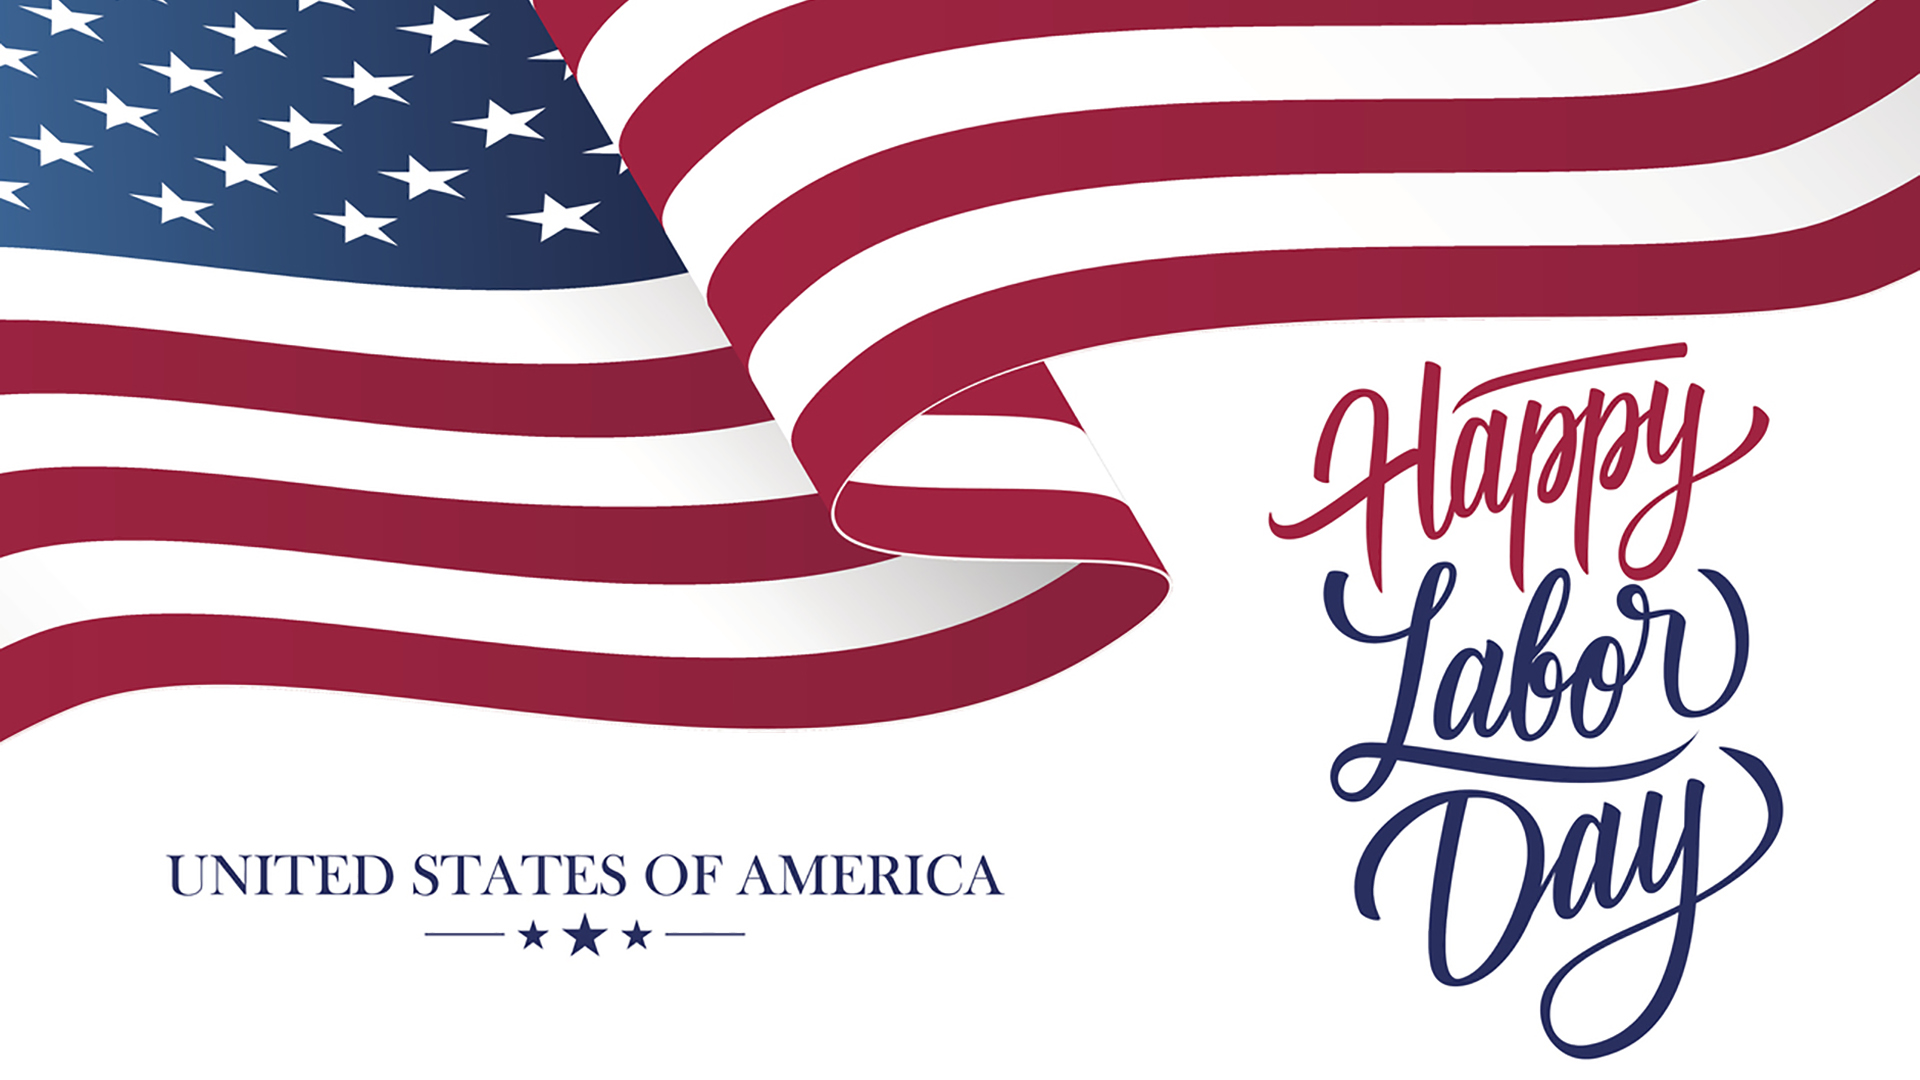 Labor Day Graphic Message for Digital Signage Communications